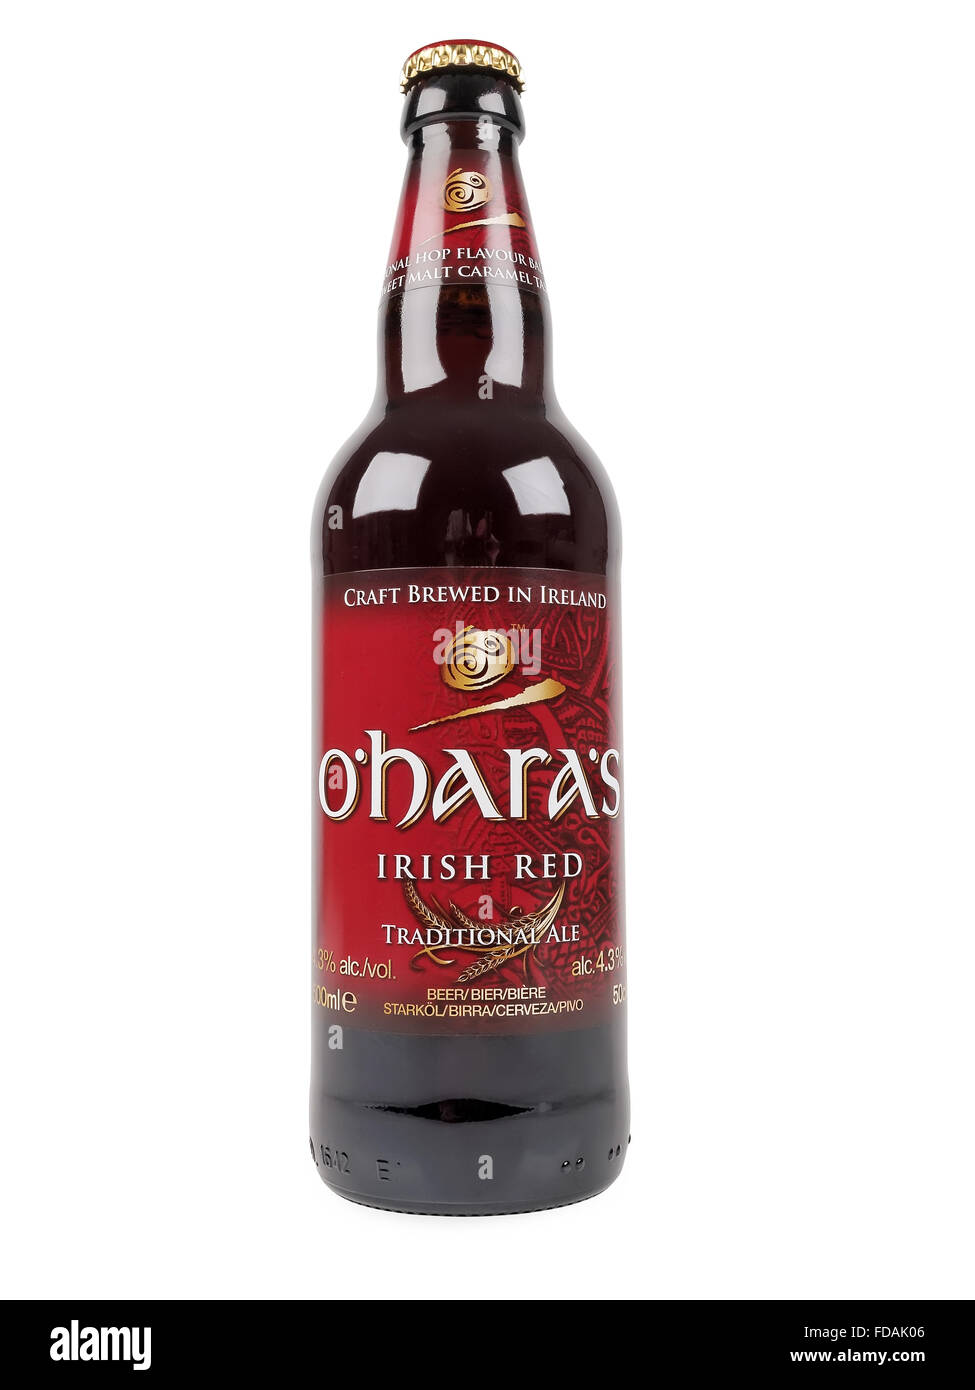 O'Hara's Irish Red is a Irish Red Ale style beer brewed by Carlow Brewing Company in County Ca Stock Photo